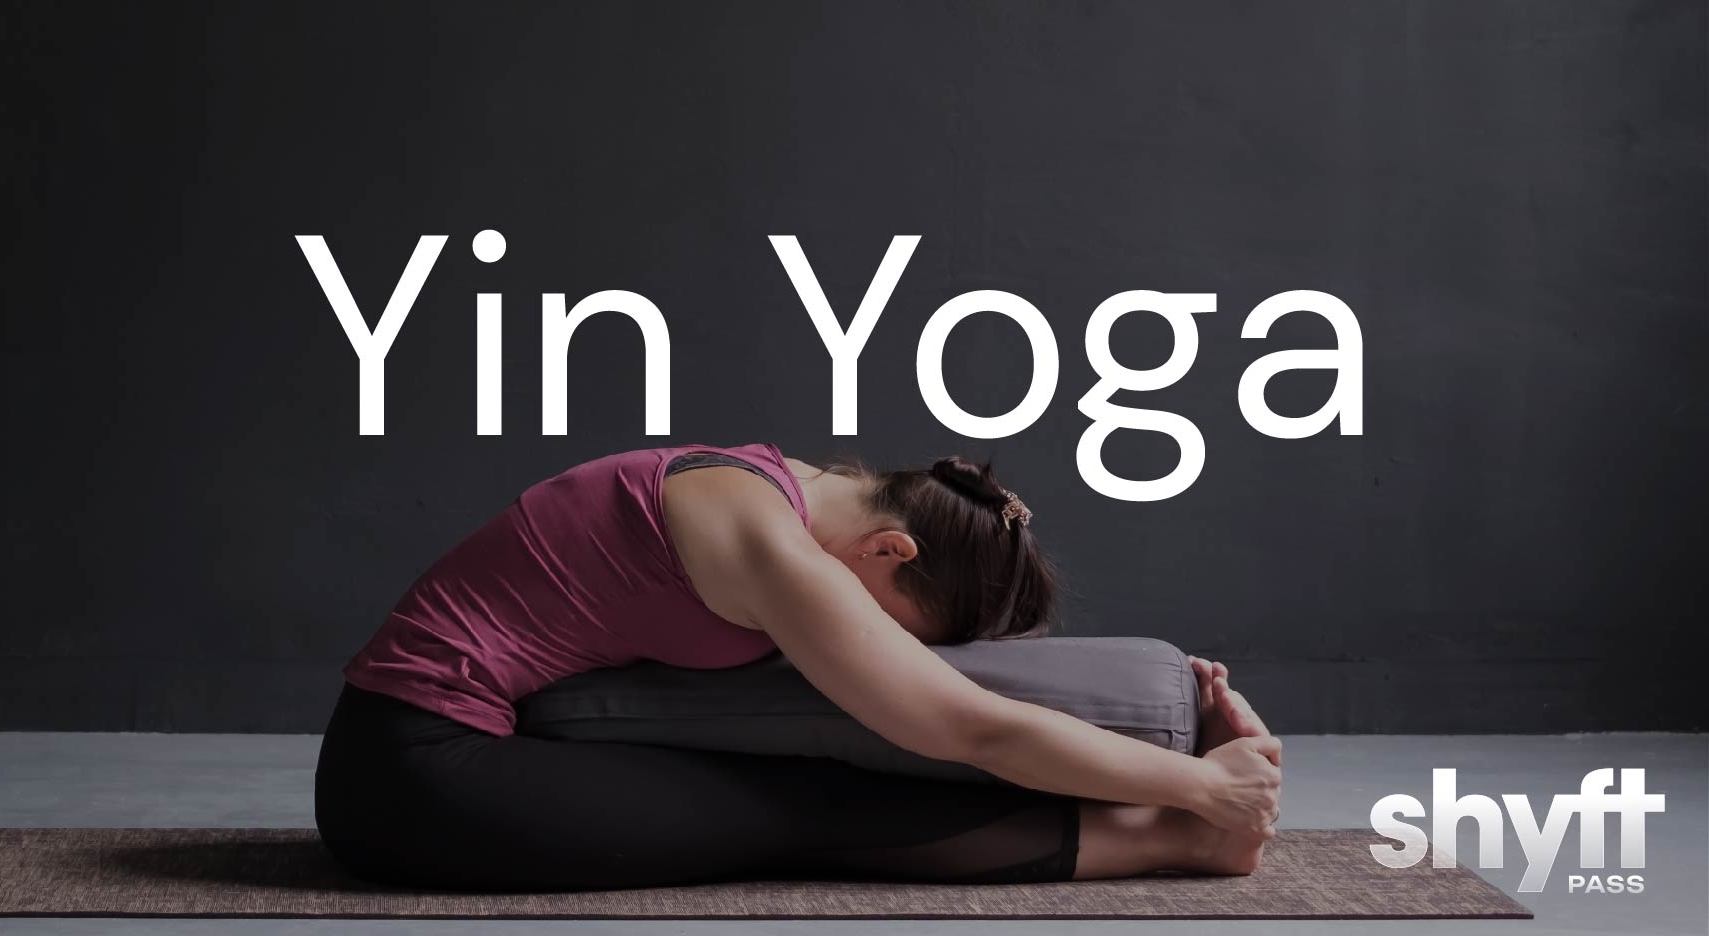 Yin Yoga Guide 2021 - Even More About Yoga